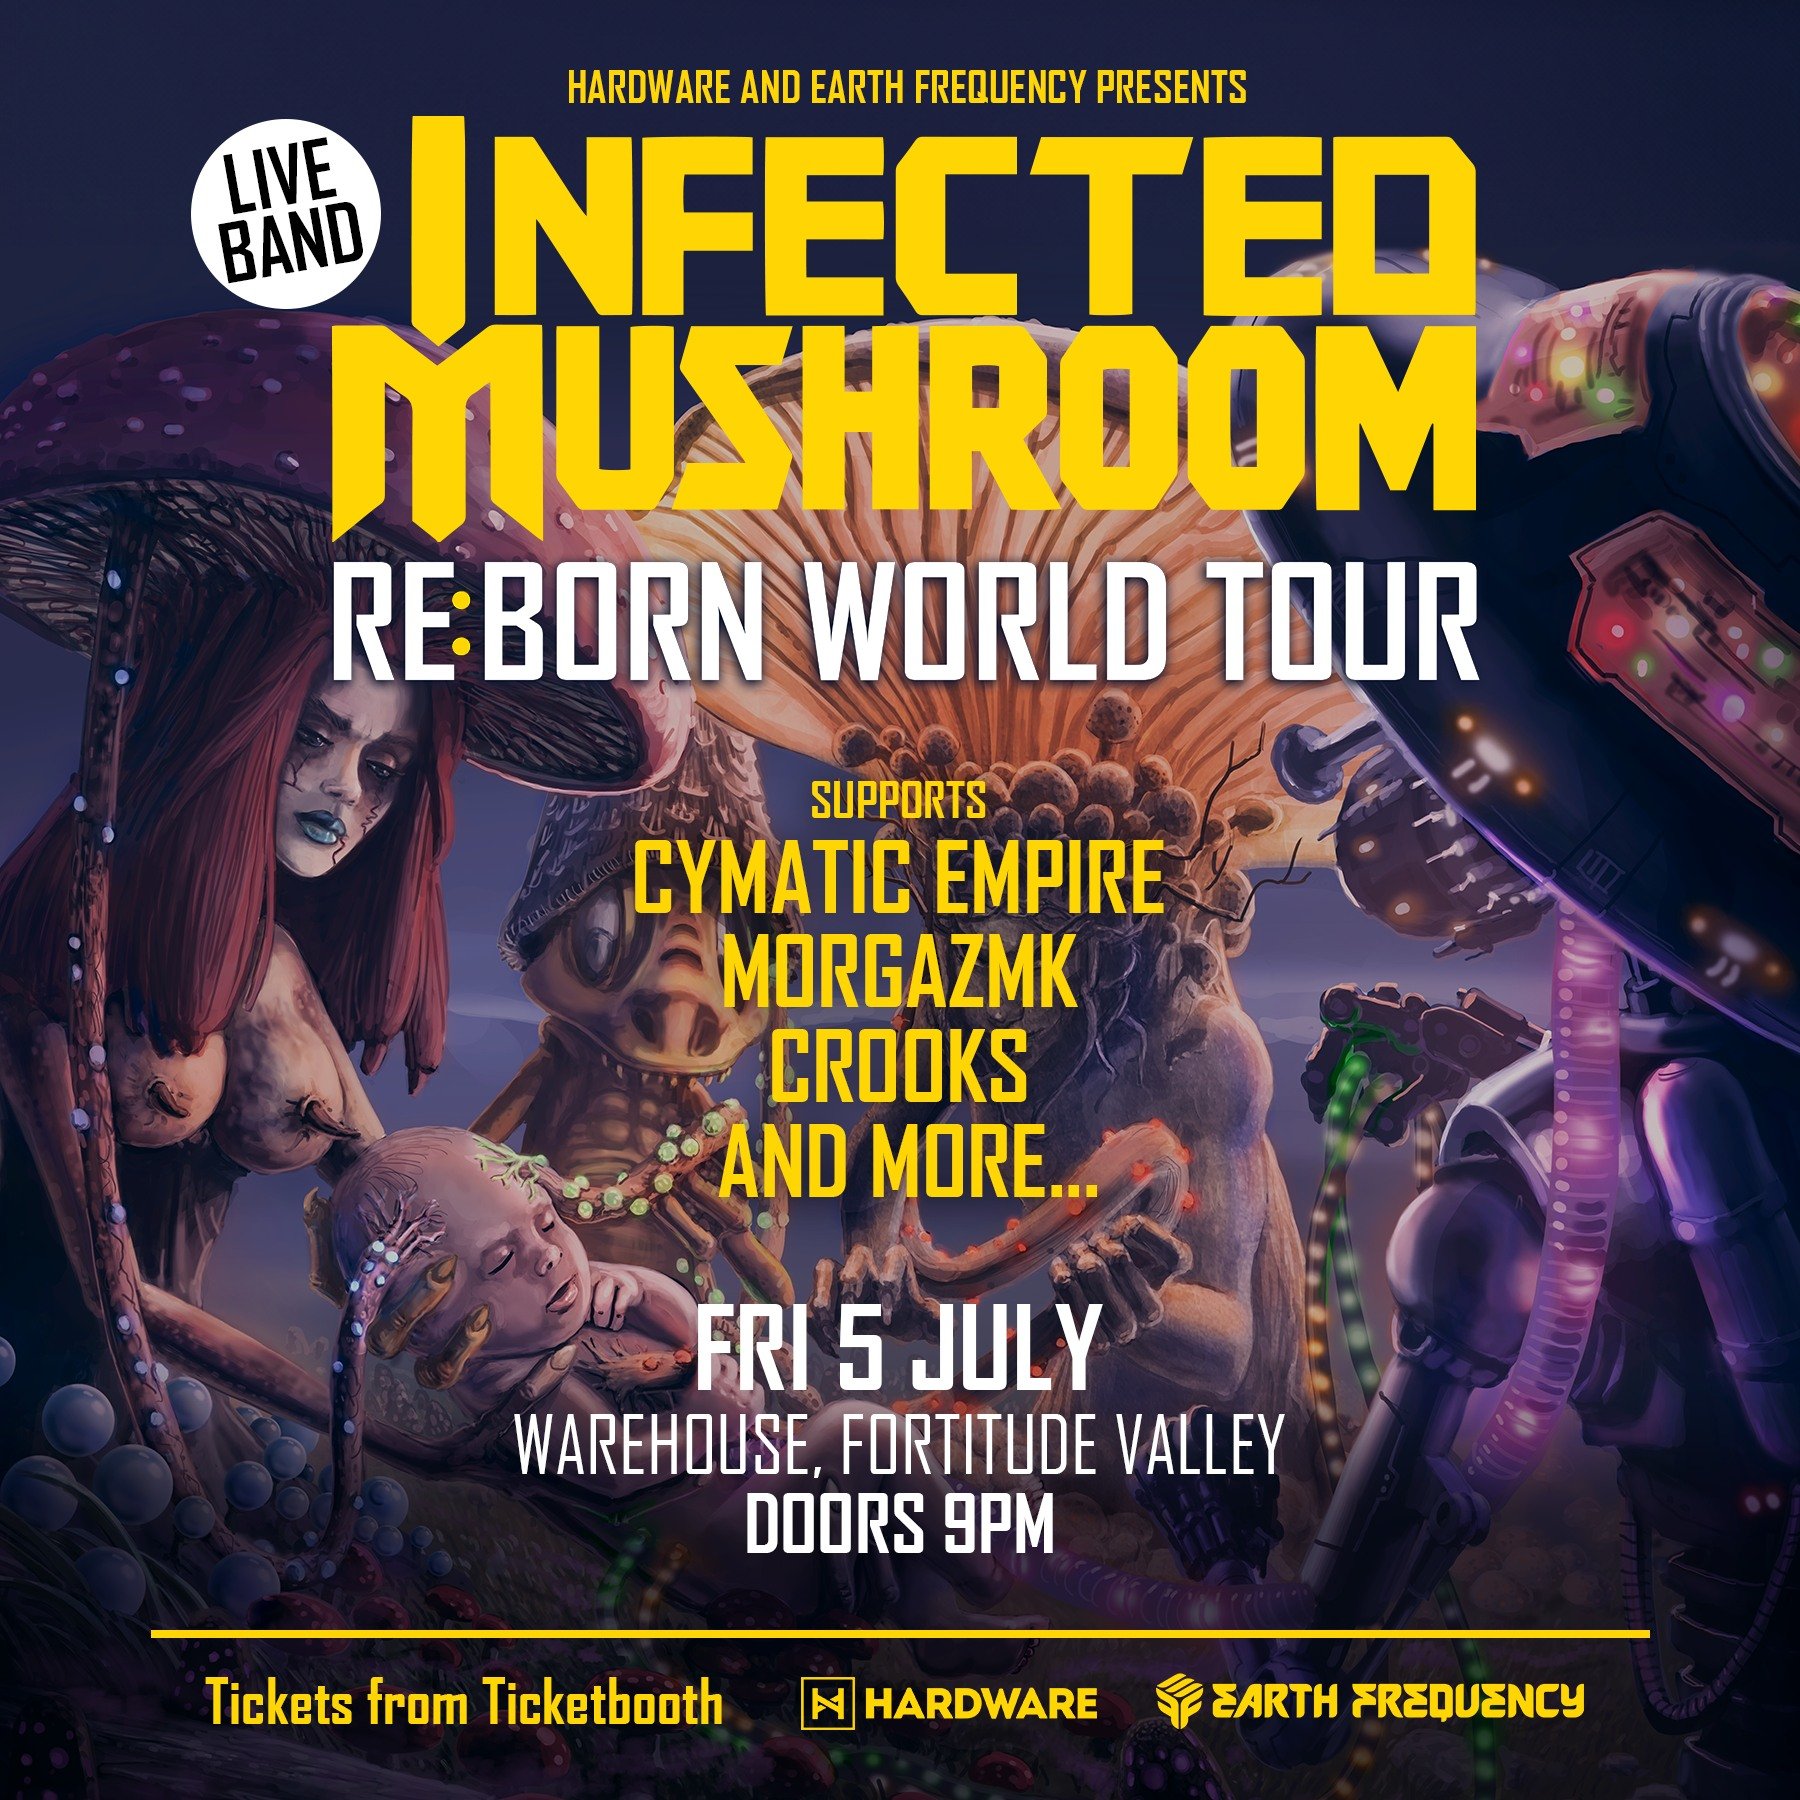 😈🍄 Less than 150 tickets remain for this show in July, go Brisbane! Looks like we will have a full house at The Warehouse to bring you a packed out full power night from the original masters of psytrance.
FINAL TICKETS &rarr; https://bit.ly/IM-BNE